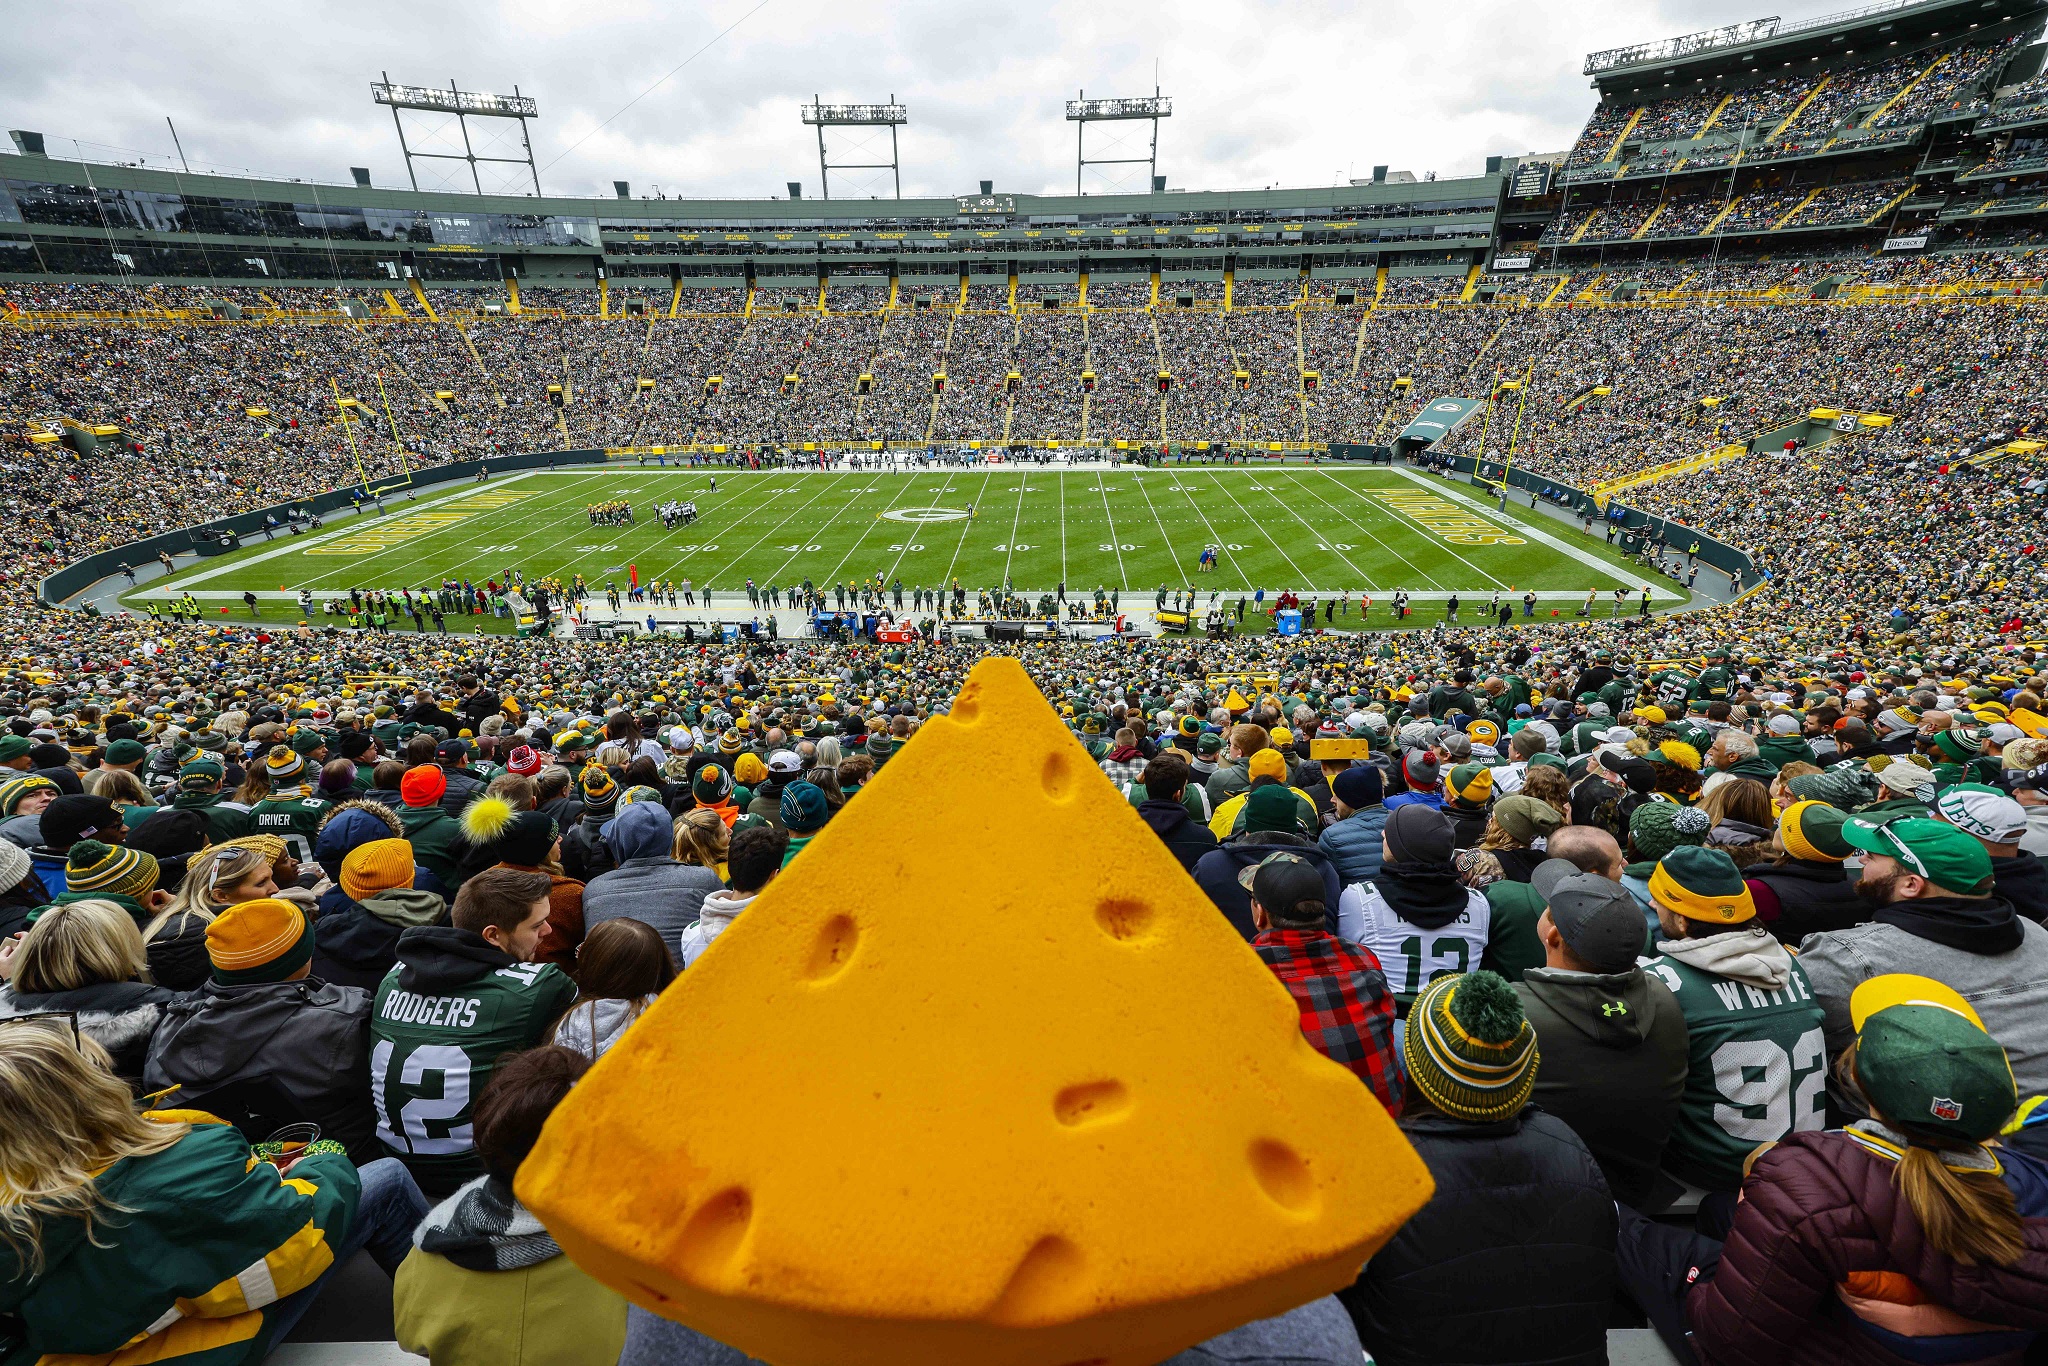 Economist Hoffer on Brewers, Packers wanting millions from taxpayers